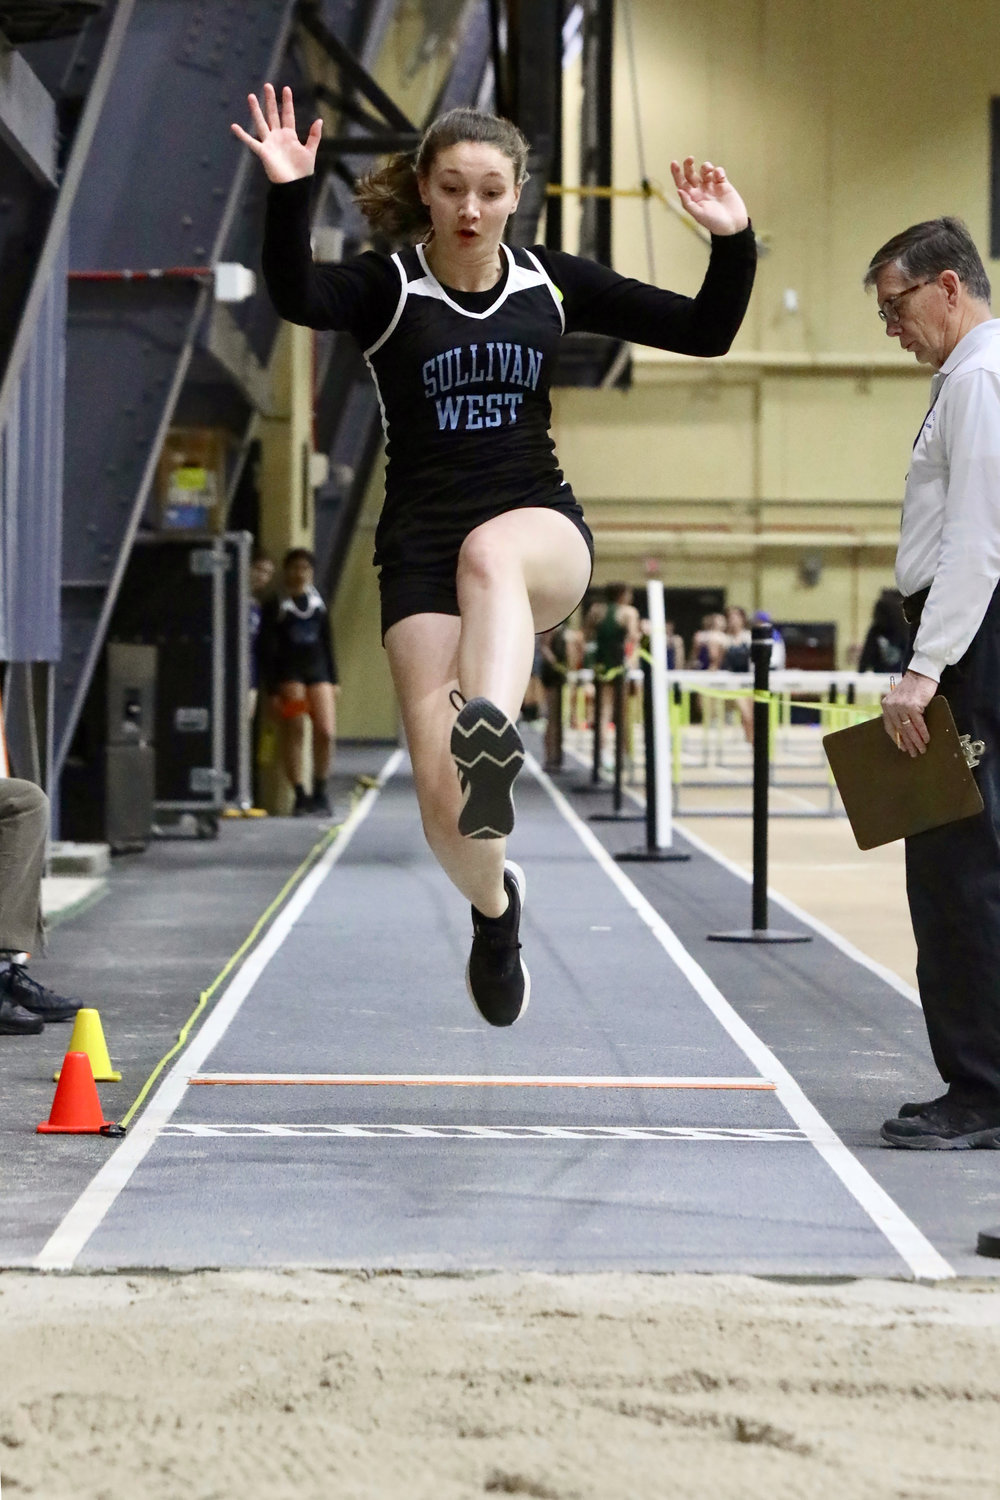 Sullivan West’s Kadence Everitt shows great form in the long jump. She captured fourth place in the Division VI event.